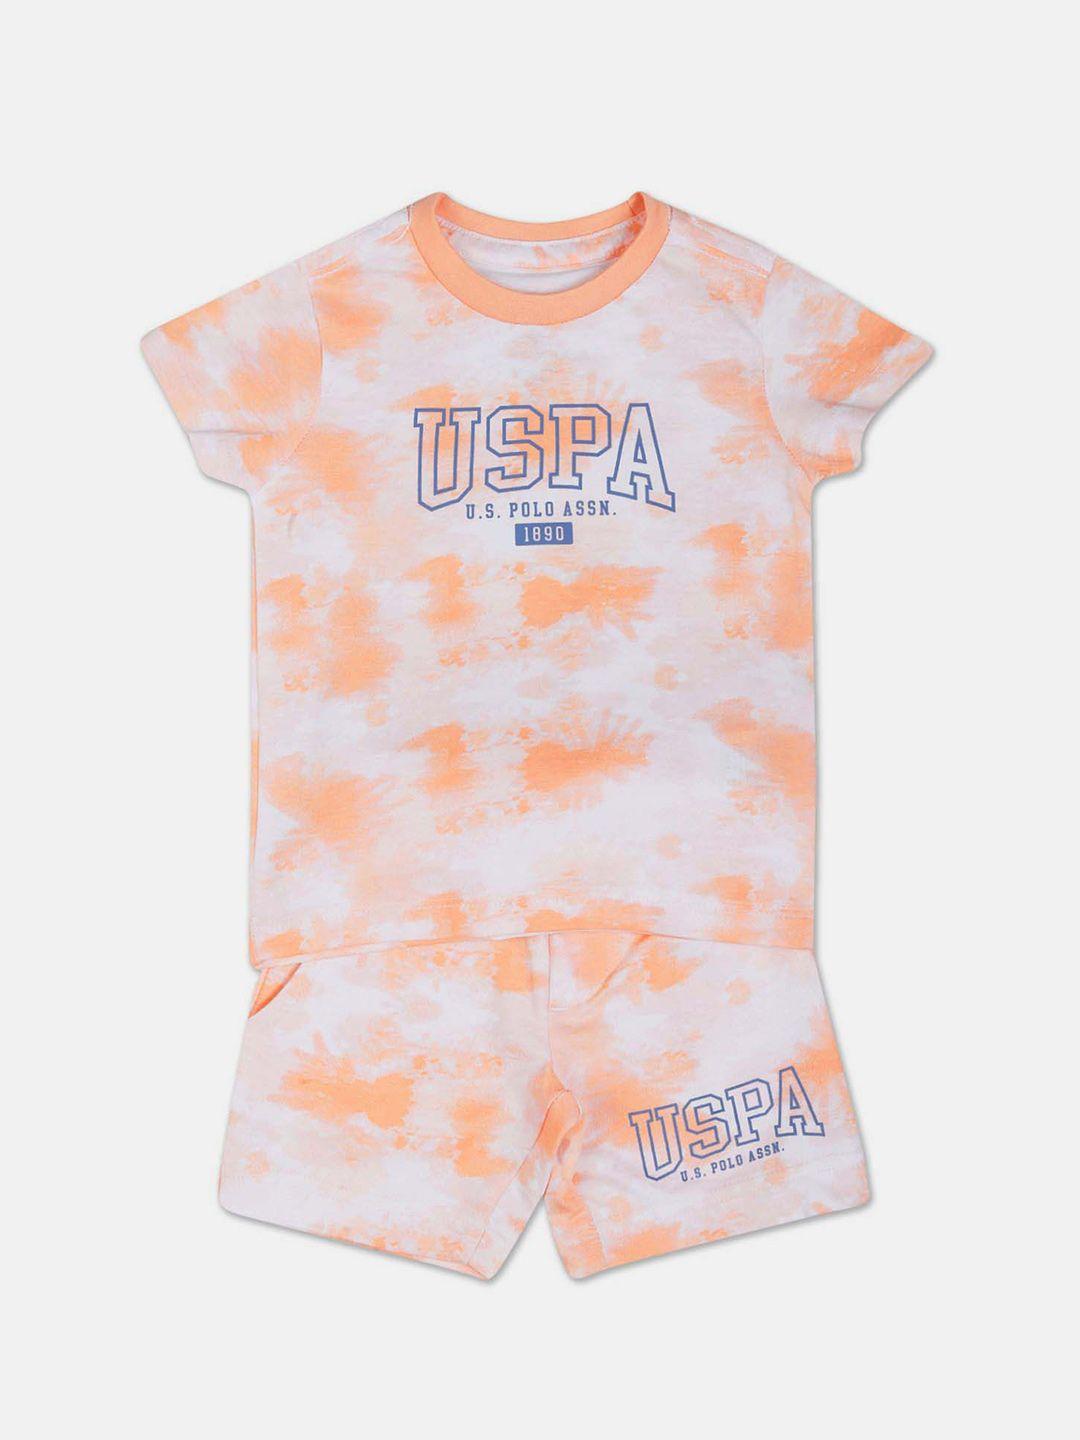 u.s.-polo-assn.-kids-boys-tie-and-dye-printed-pure-cotton-t-shirt-with-shorts-clothing-set